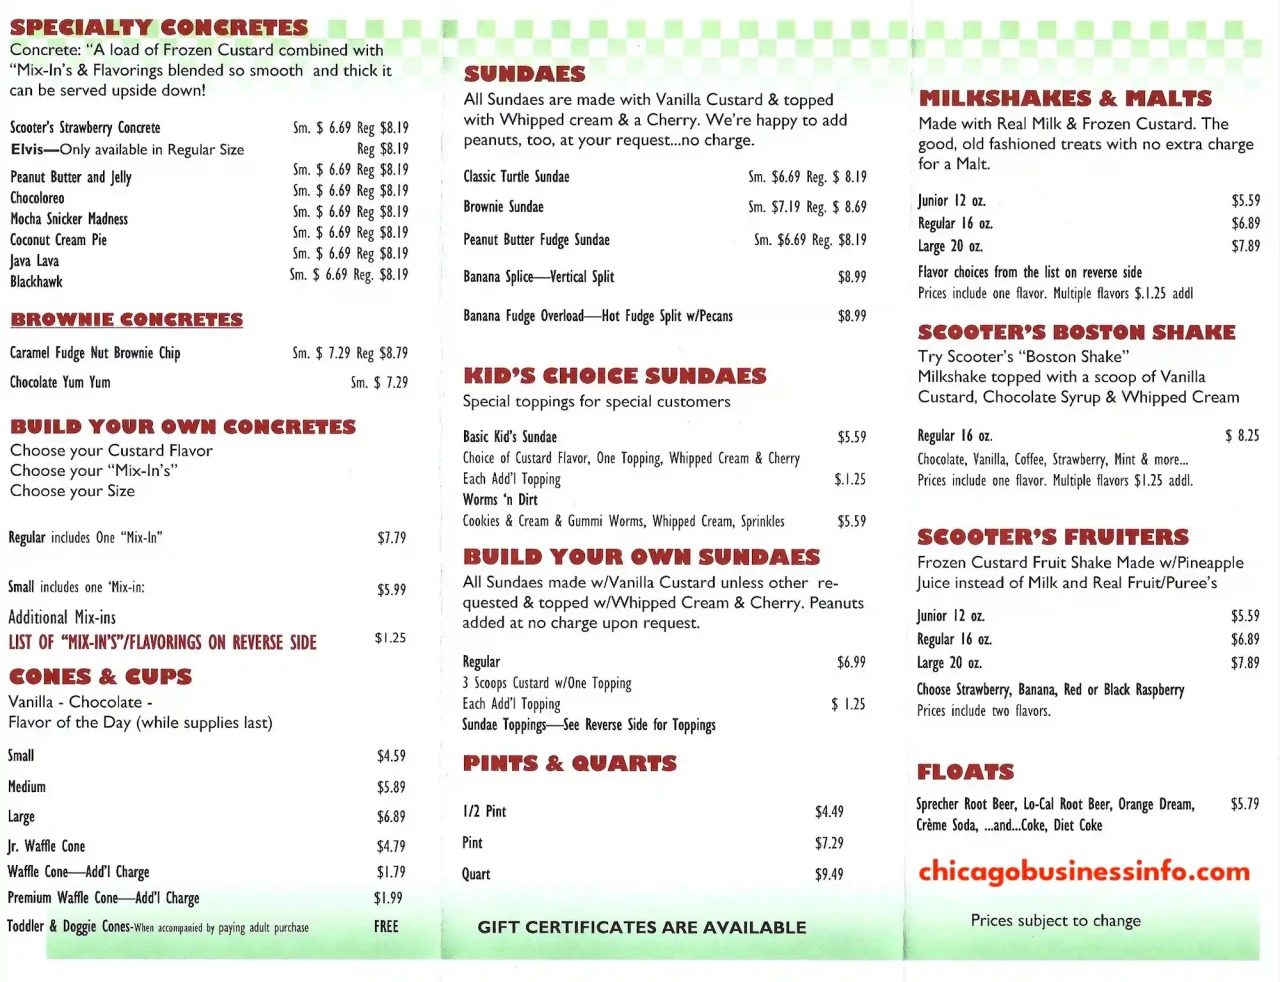 Scooter's Frozen Custard Chicago Carry Out Menu 2